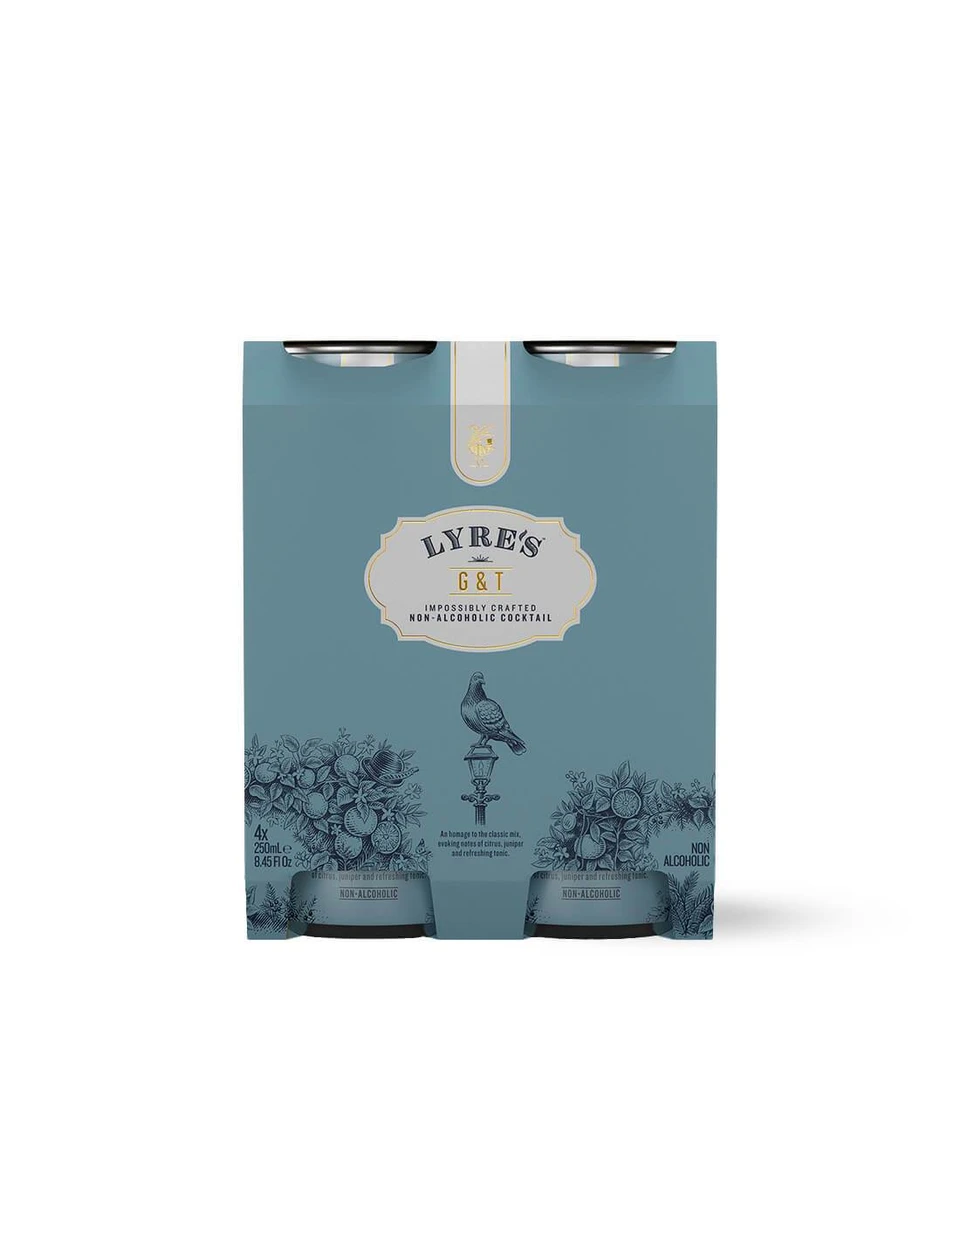 Lyre's Non-Alcoholic Gin & Tonic (G&T) RTD Ready to Drink Cans 250ml